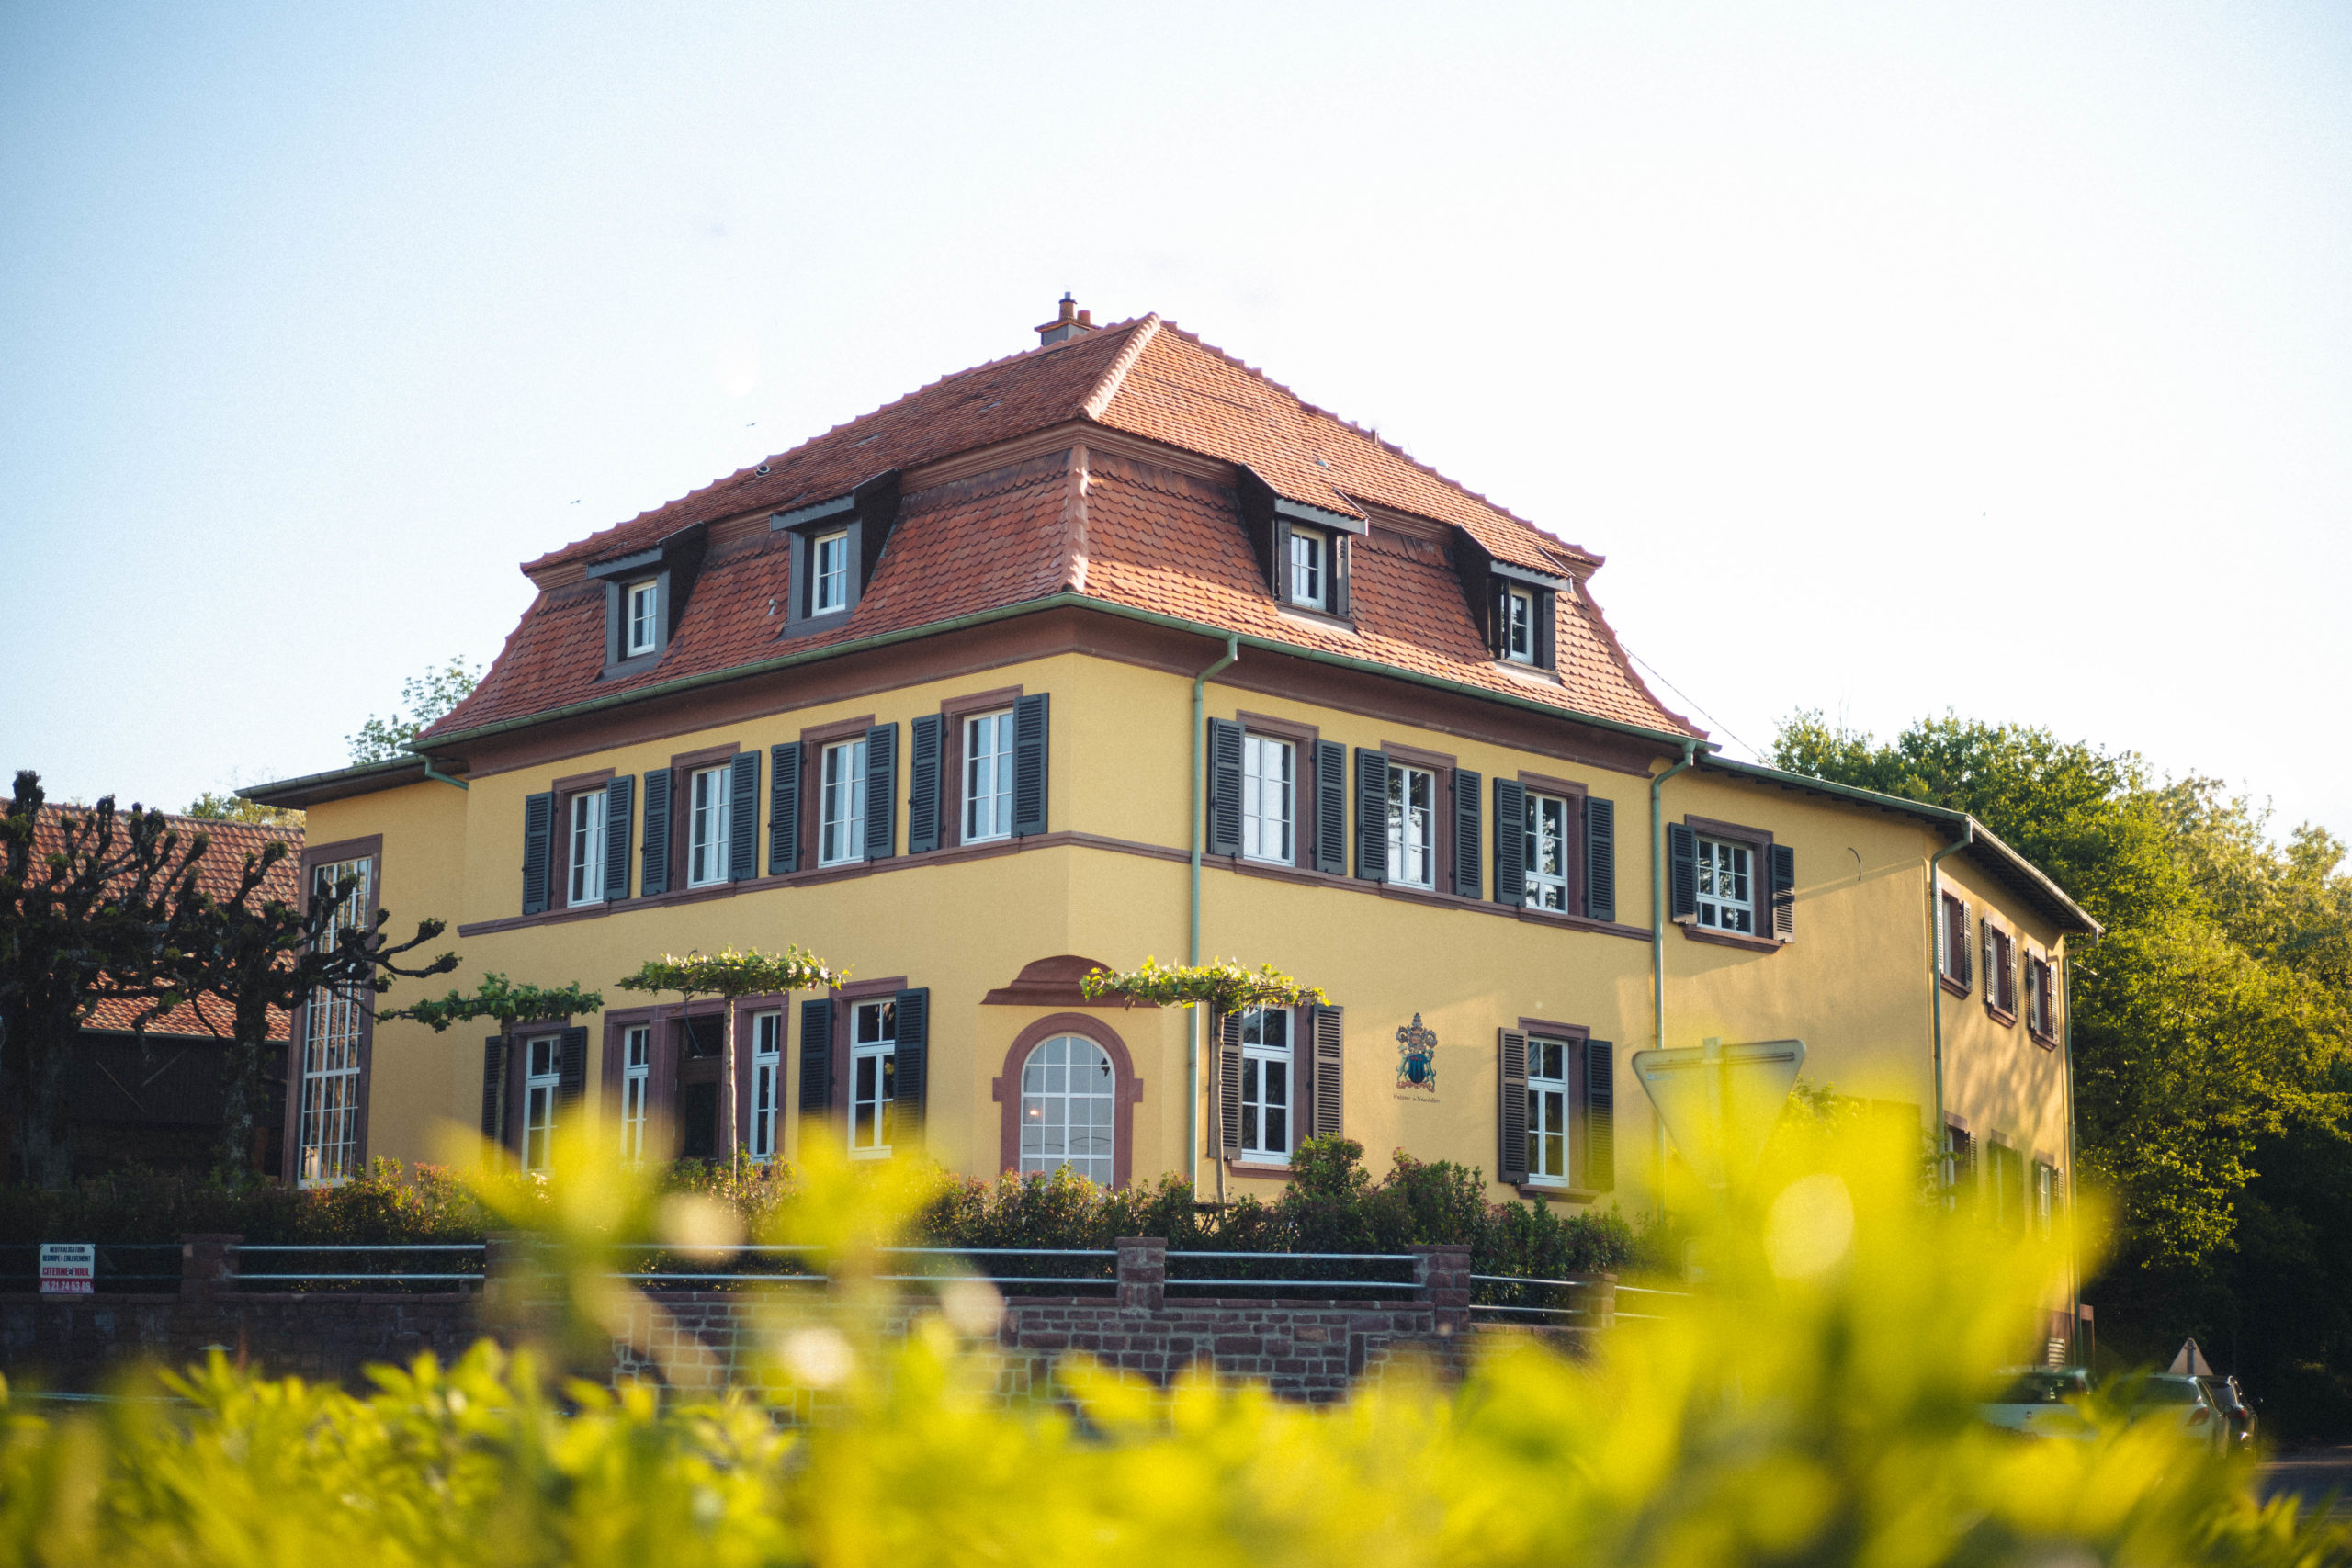 The Restaurant Amitié opens its doors for you in Hartmannswiller in Alsace in a beautiful 1900 historic building near the Château Ollwiller and its vineyards.